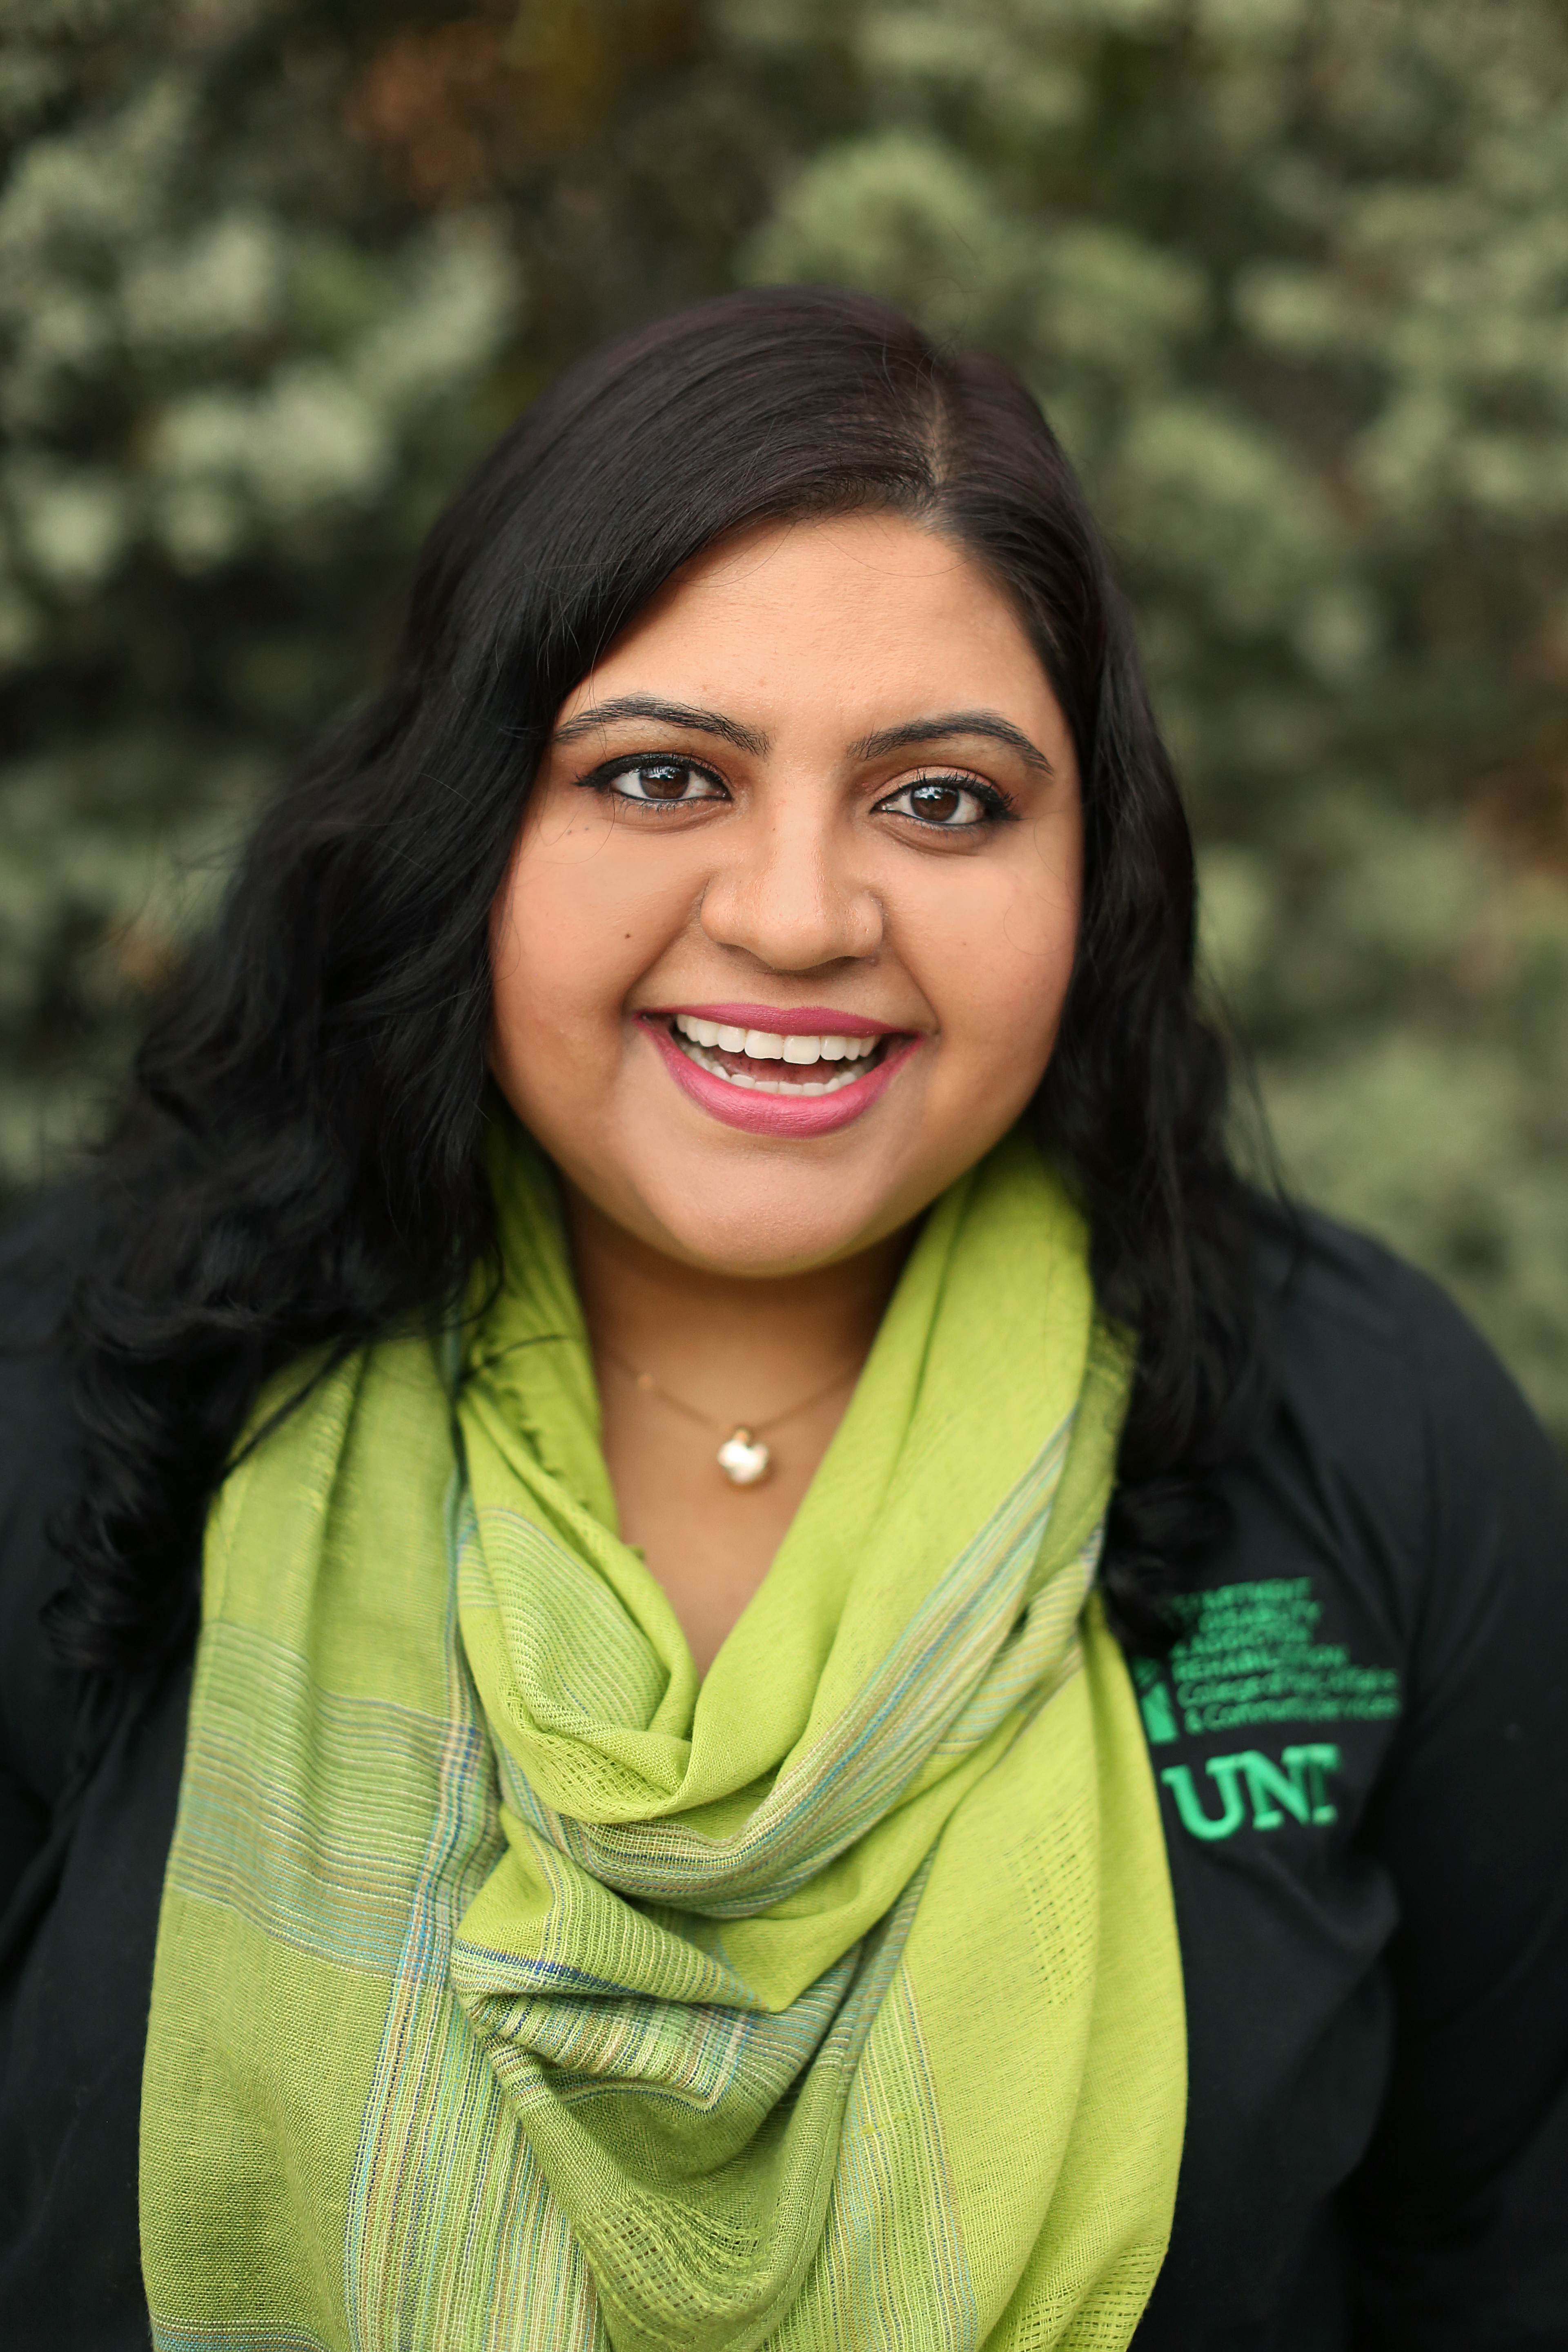 Rachita Sharma, a faculty member in the University of North Texas Department of Rehabilitation and Health Services, received the President’s Award from the National As
sociation of Multicultural Rehabilitation Concerns for her work on the organization's annual conferences.